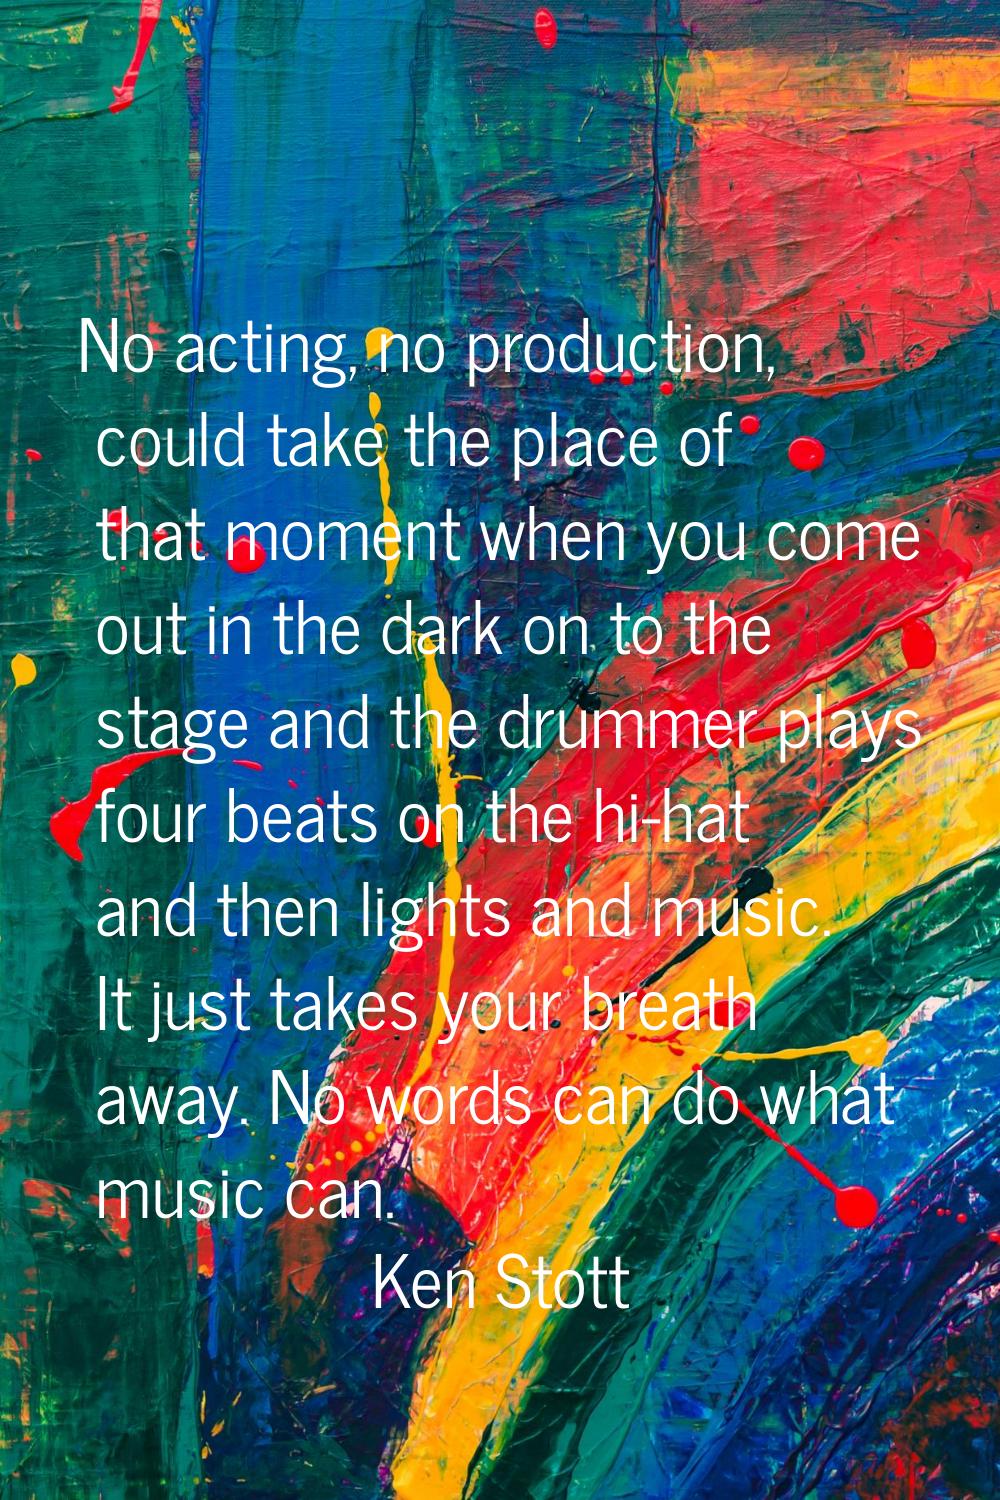 No acting, no production, could take the place of that moment when you come out in the dark on to t